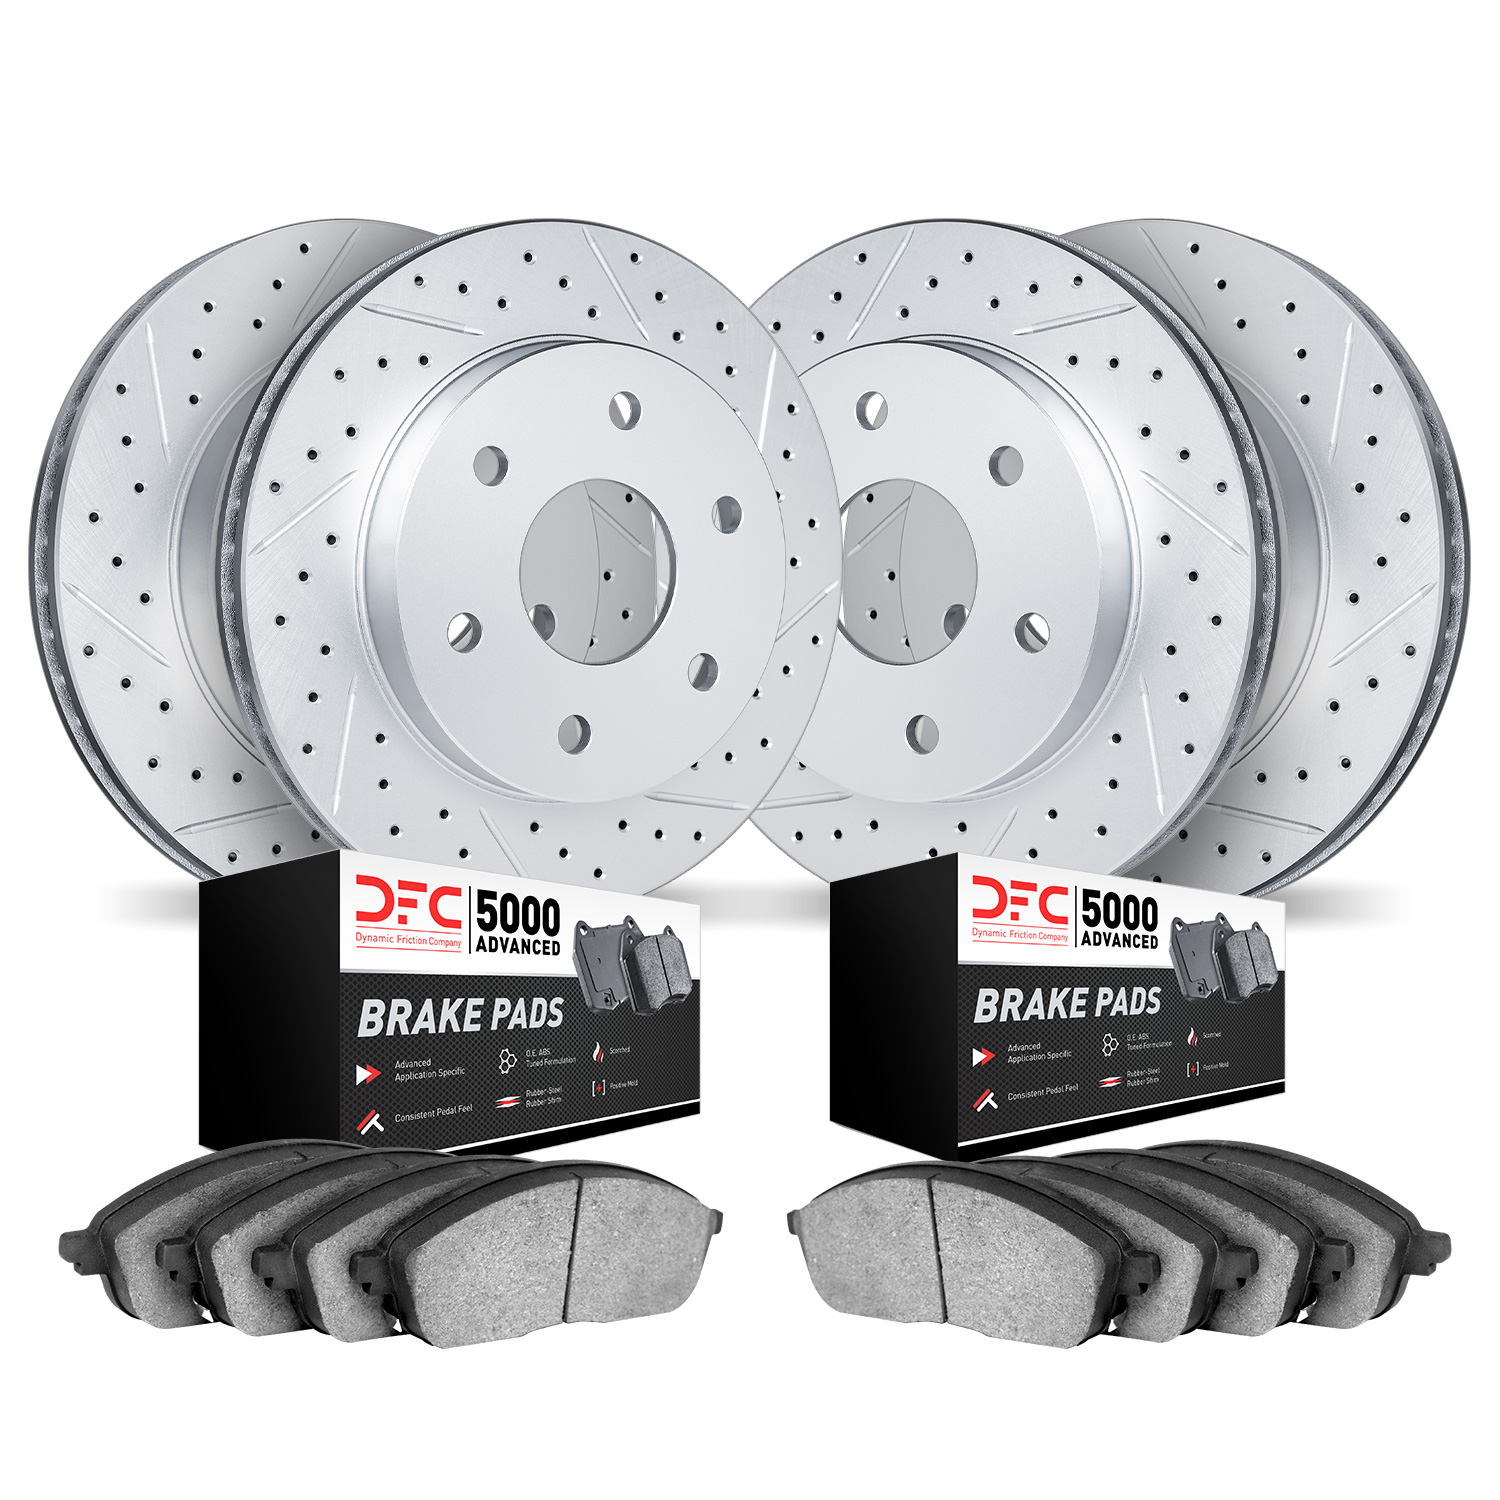 2504-48022 Geoperformance Drilled/Slotted Rotors w/5000 Advanced Brake Pads Kit, 2002-2008 GM, Position: Front and Rear